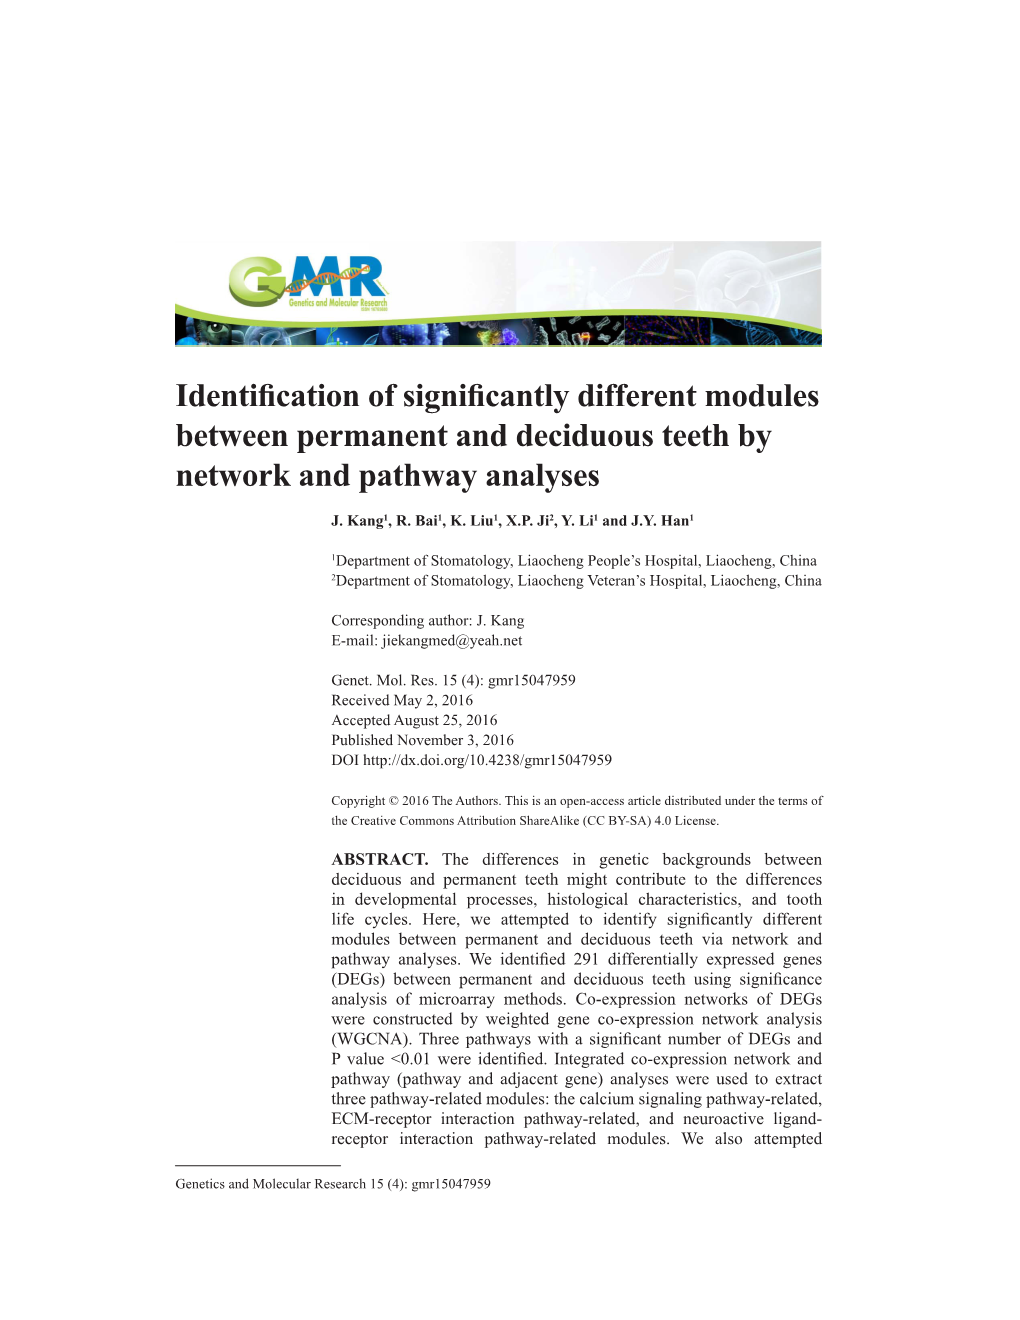 Identification of Significantly Different Modules Between Permanent and Deciduous Teeth by Network and Pathway Analyses